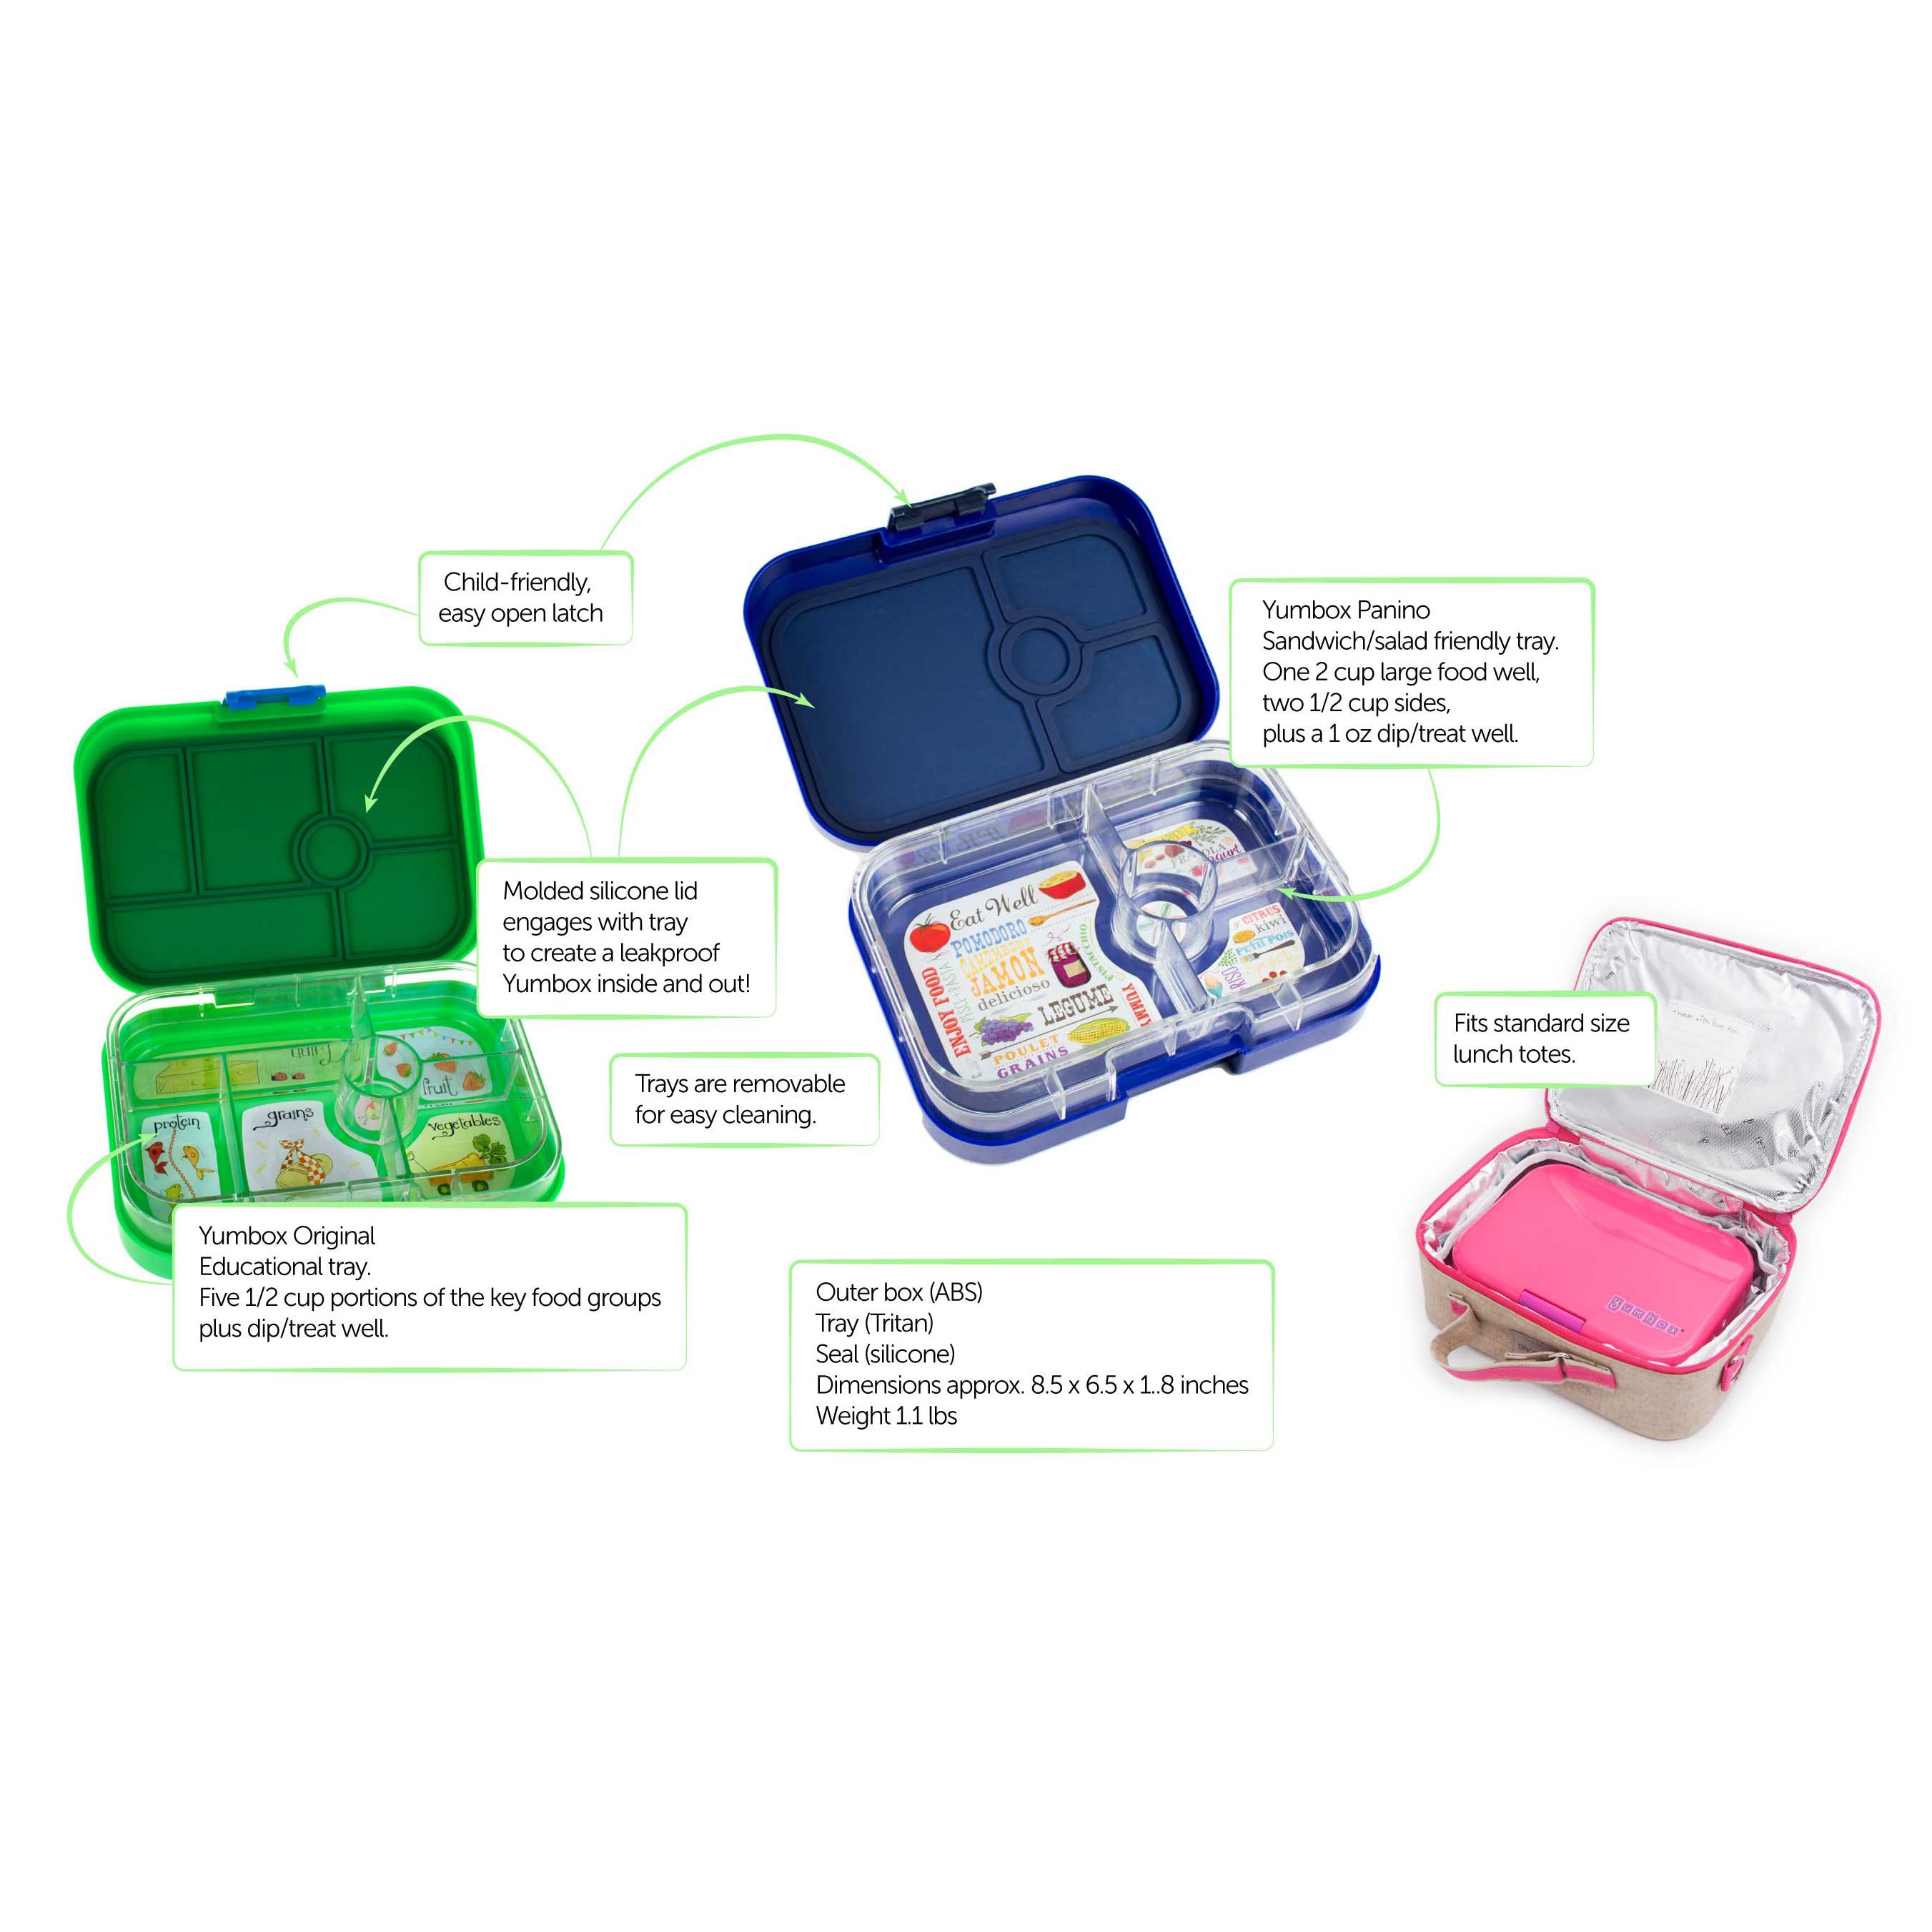 yumbox-mini-snack-cherie-pink-3-compartment-lunch-box- (5)